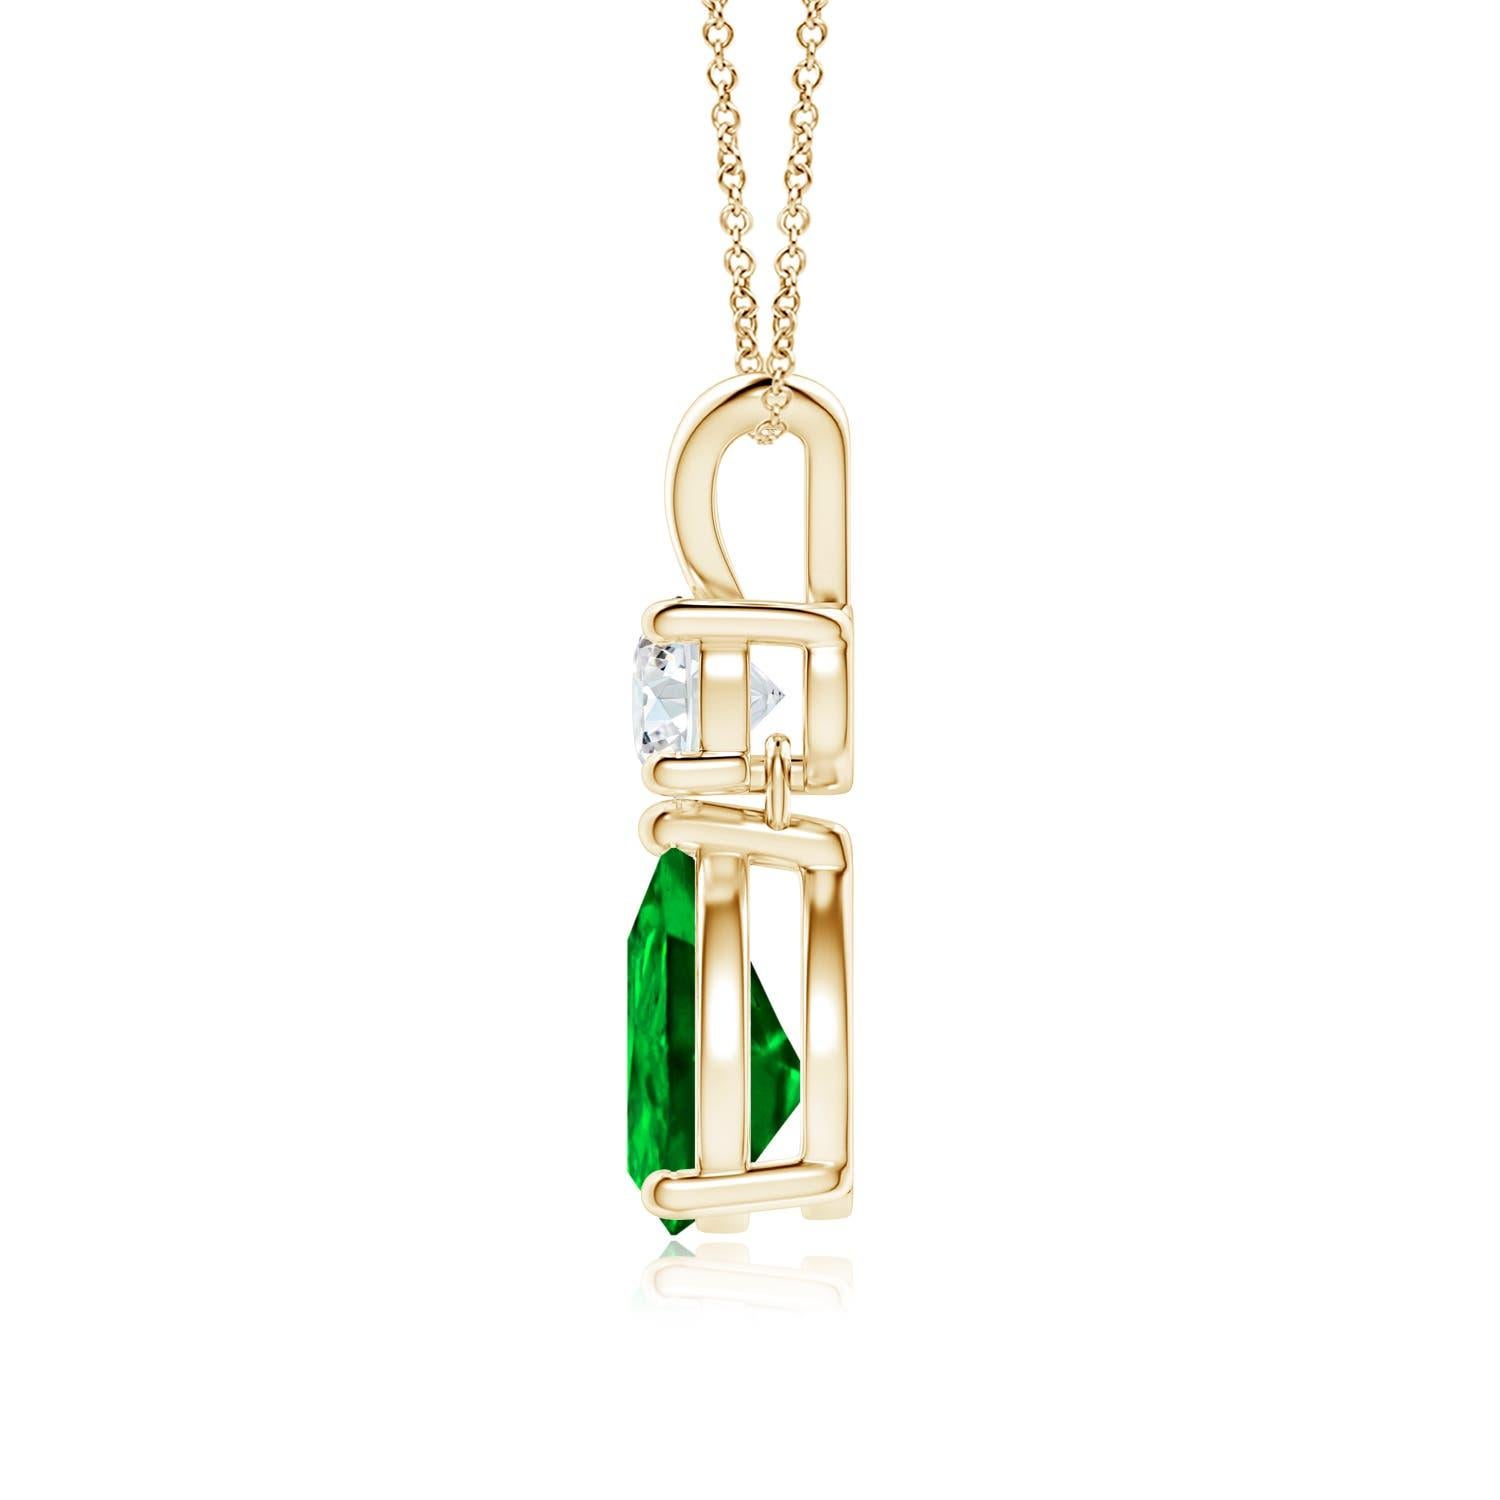 A vivid green pear cut emerald dangles from a sparkling white diamond on this elegant drop pendant. The lustrous V bale adds beauty to this 14k yellow gold emerald and diamond pendant. It exudes luxurious charm with its remarkable long drop